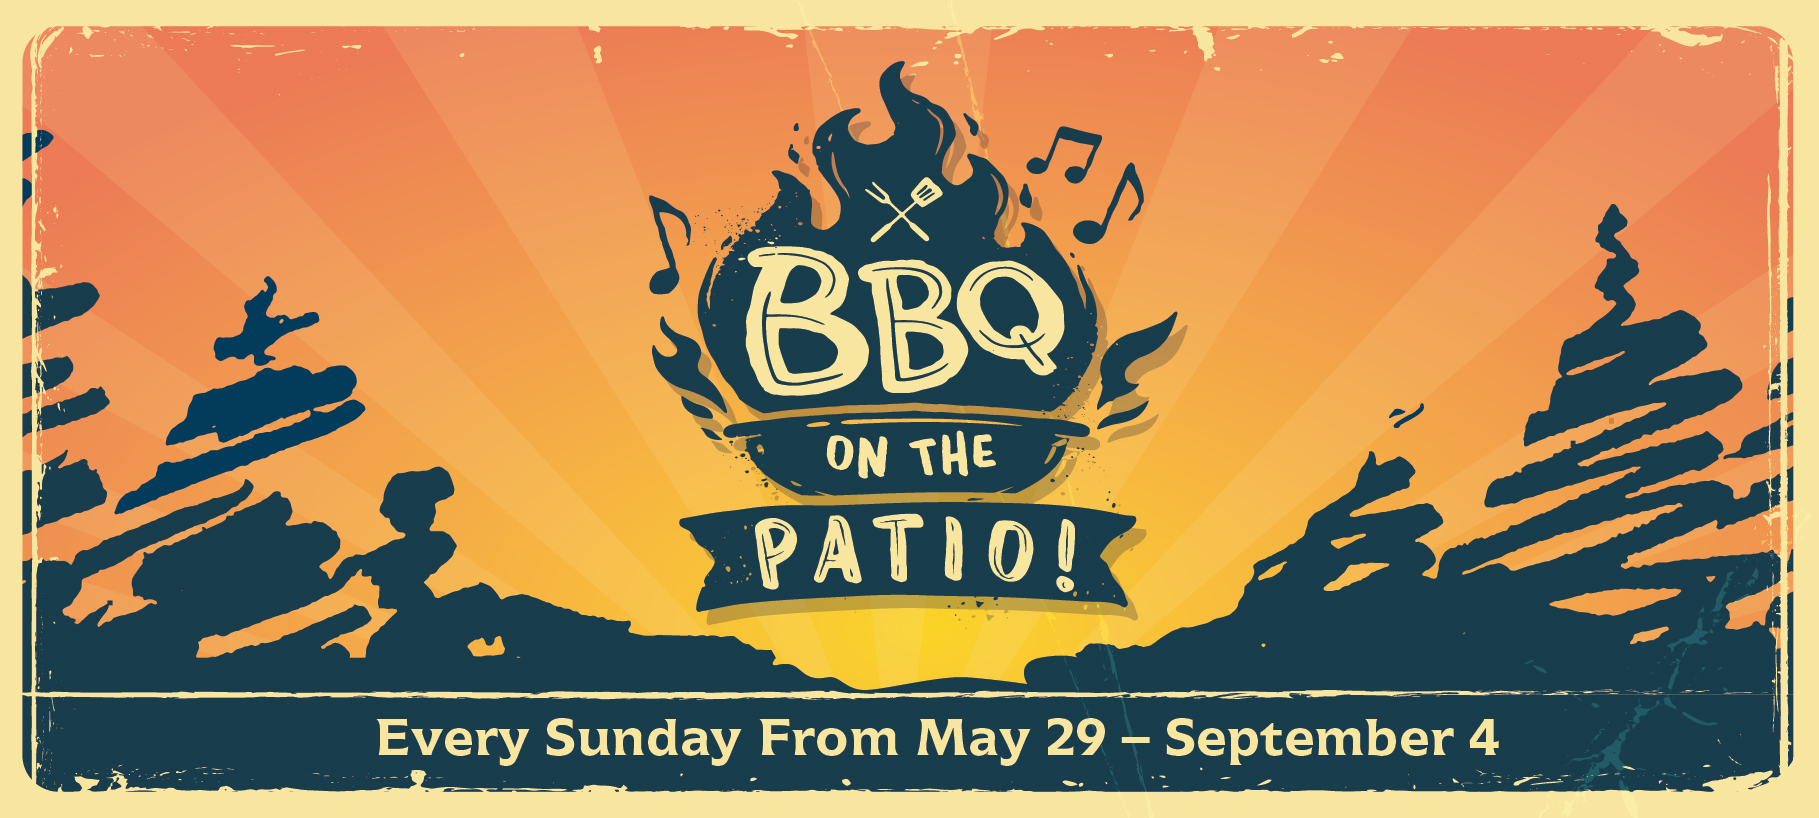 Live Tunes & BBQ on the Patio